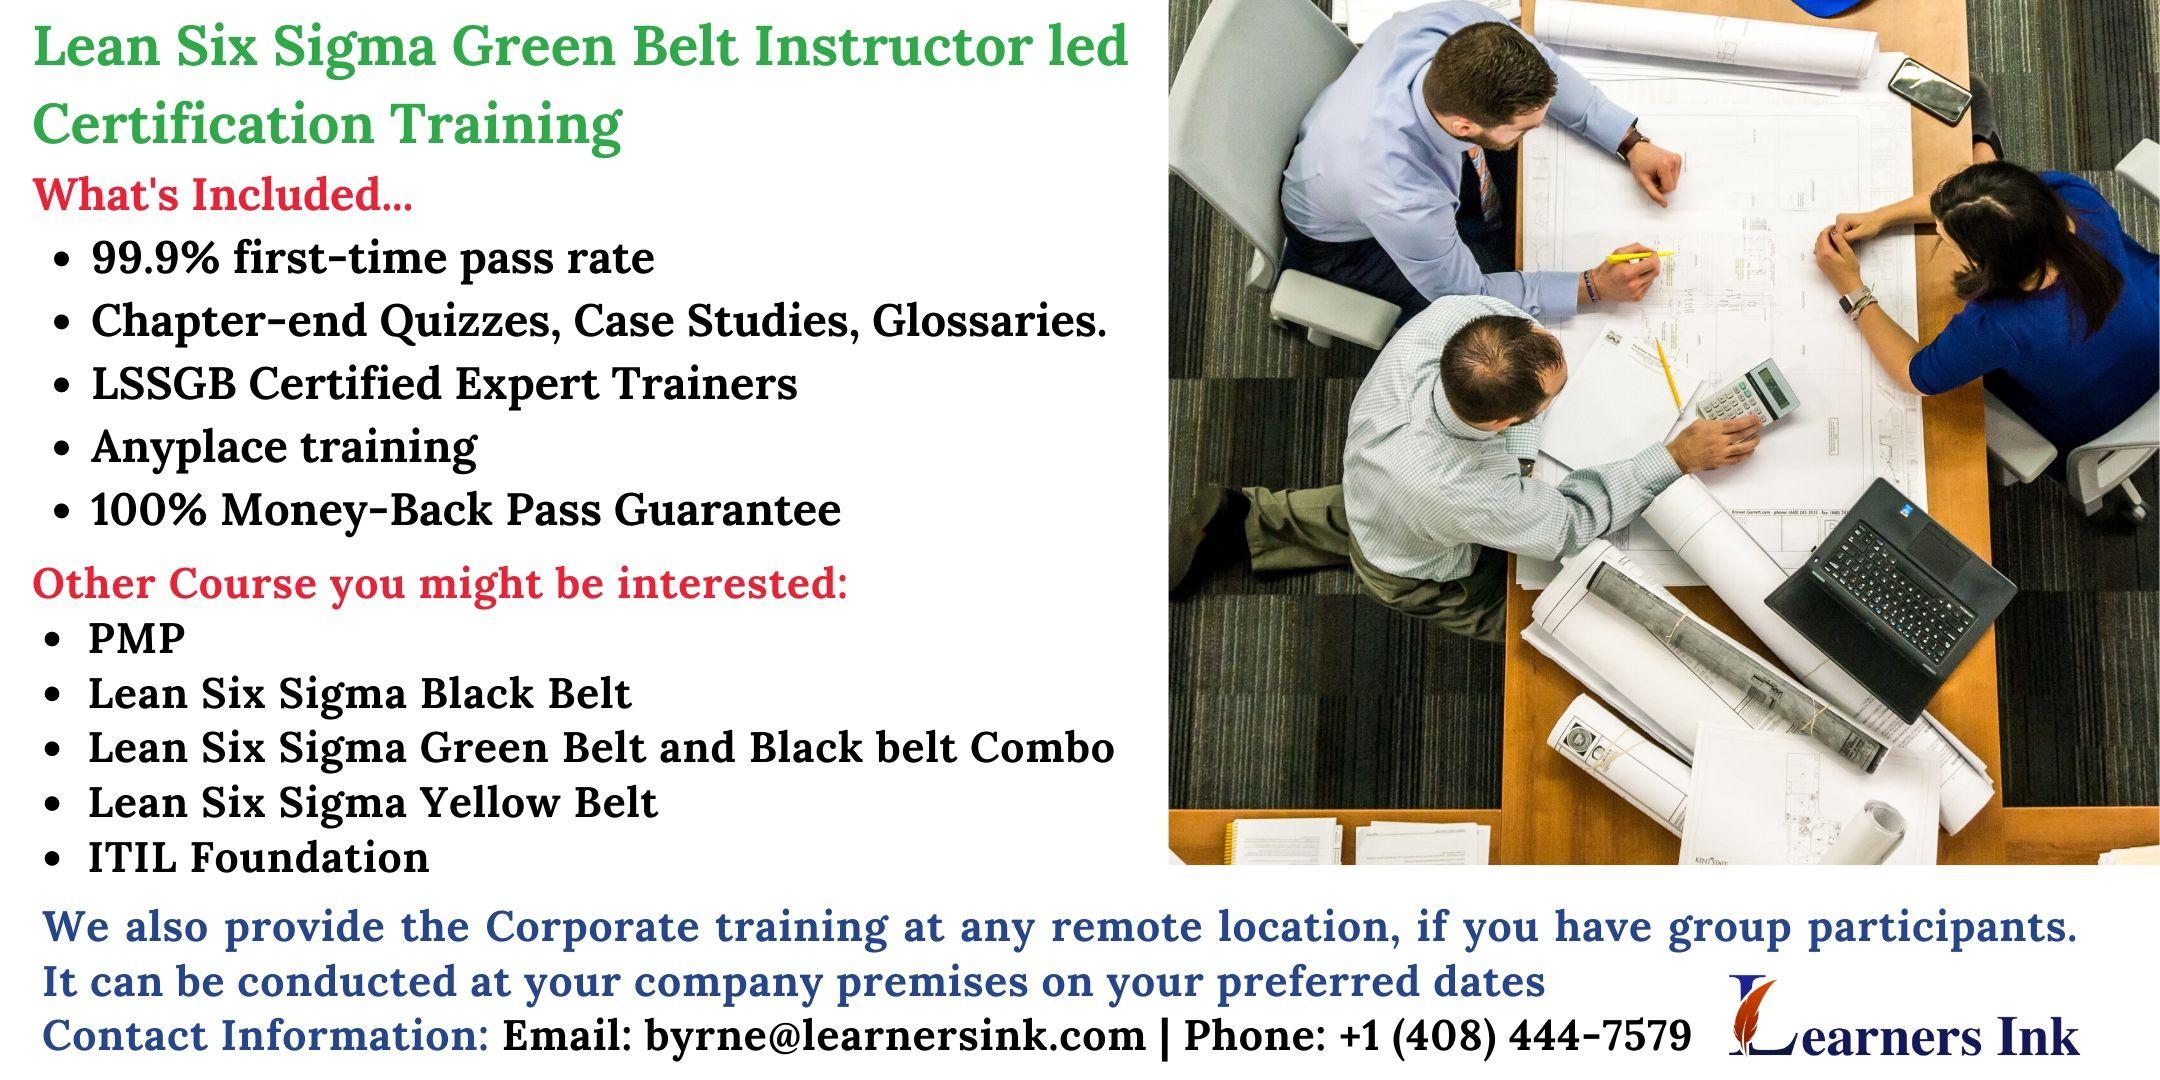 Lean Six Sigma Green Belt Certification Training Course (LSSGB) in Surprise